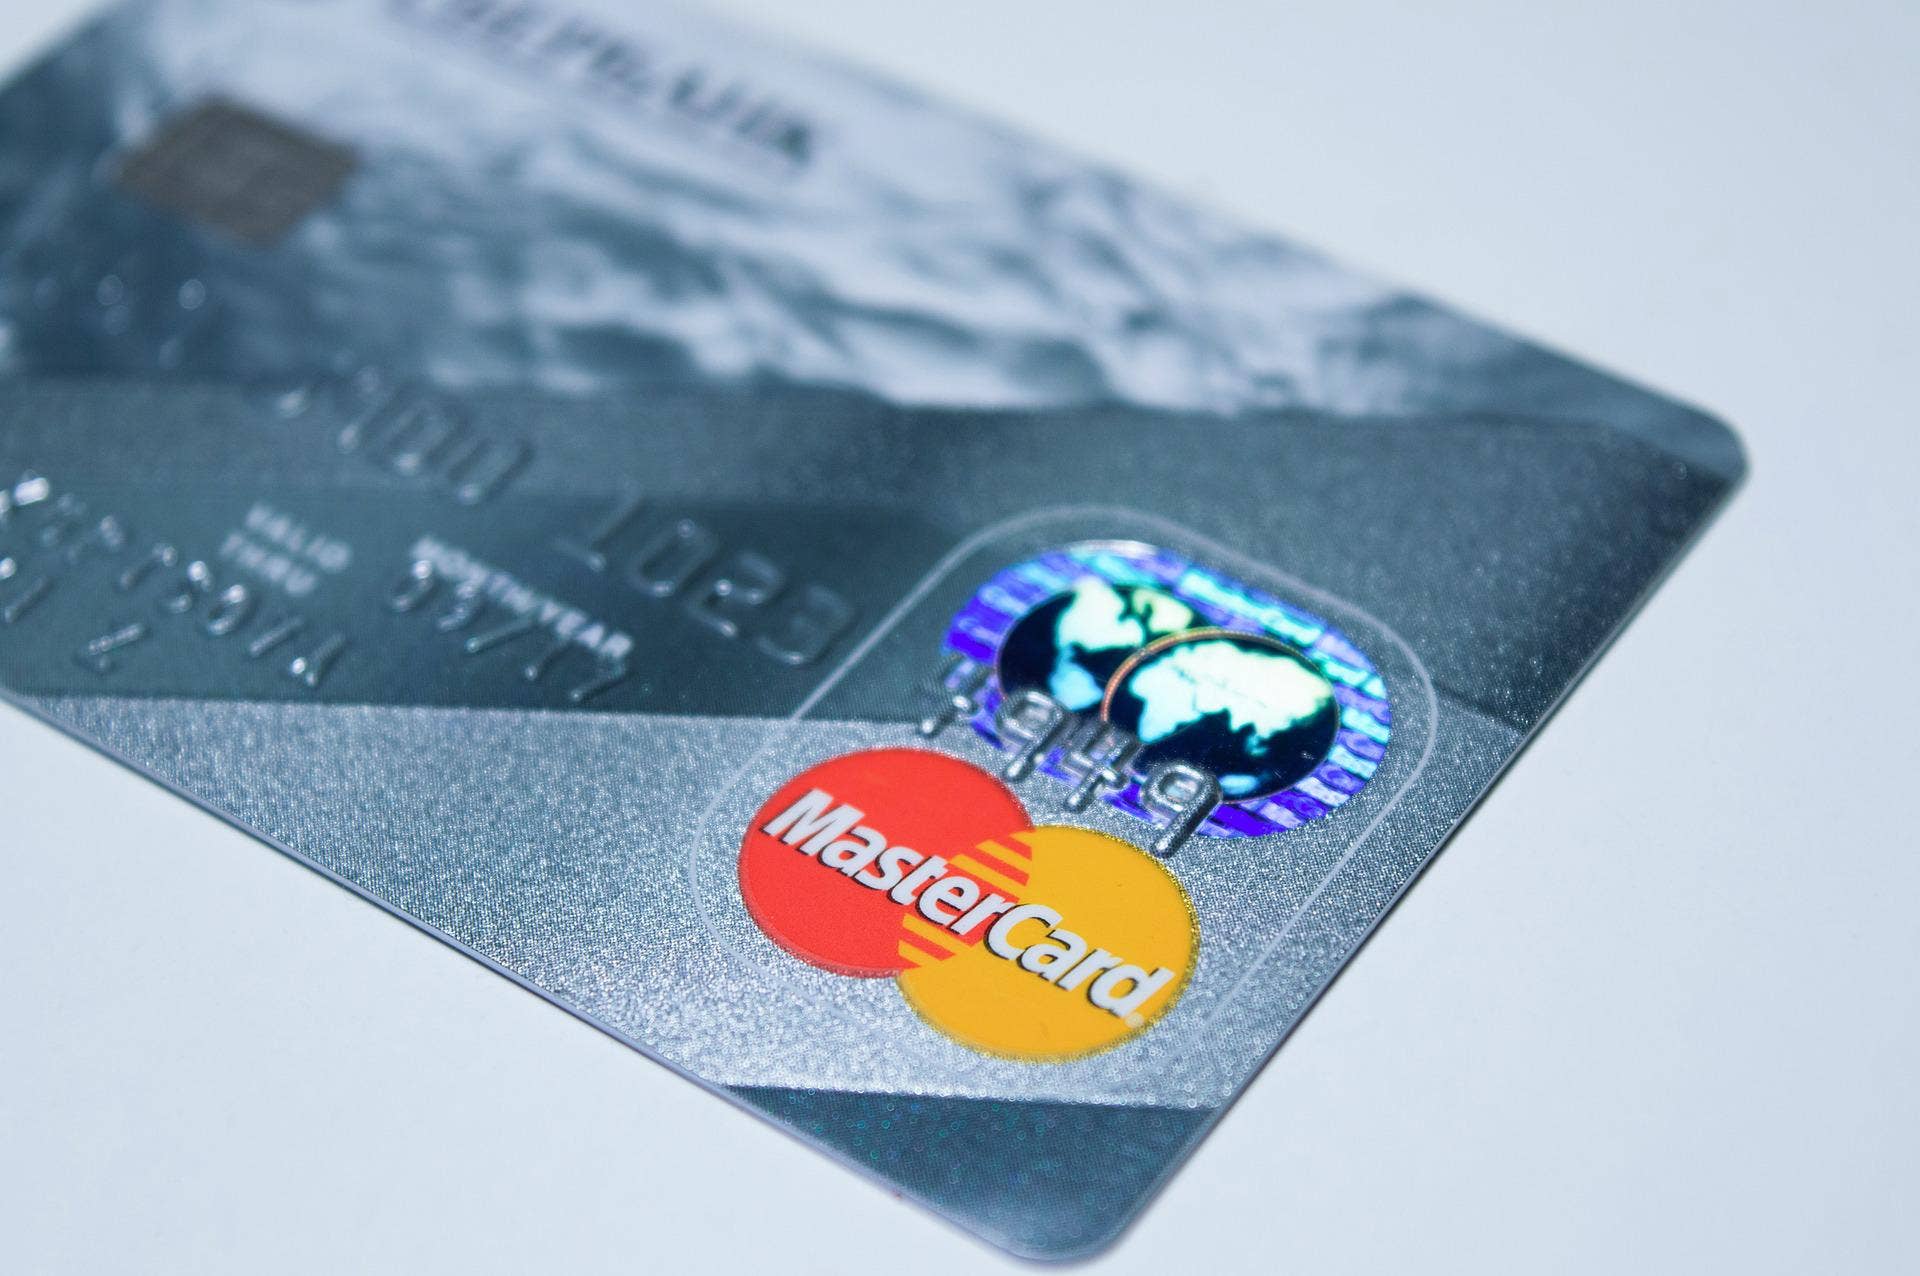 Mastercard Is Long-Term Compounder Trading At Discount To Defensive Sectors, Analysts Say Post Q4 Beat